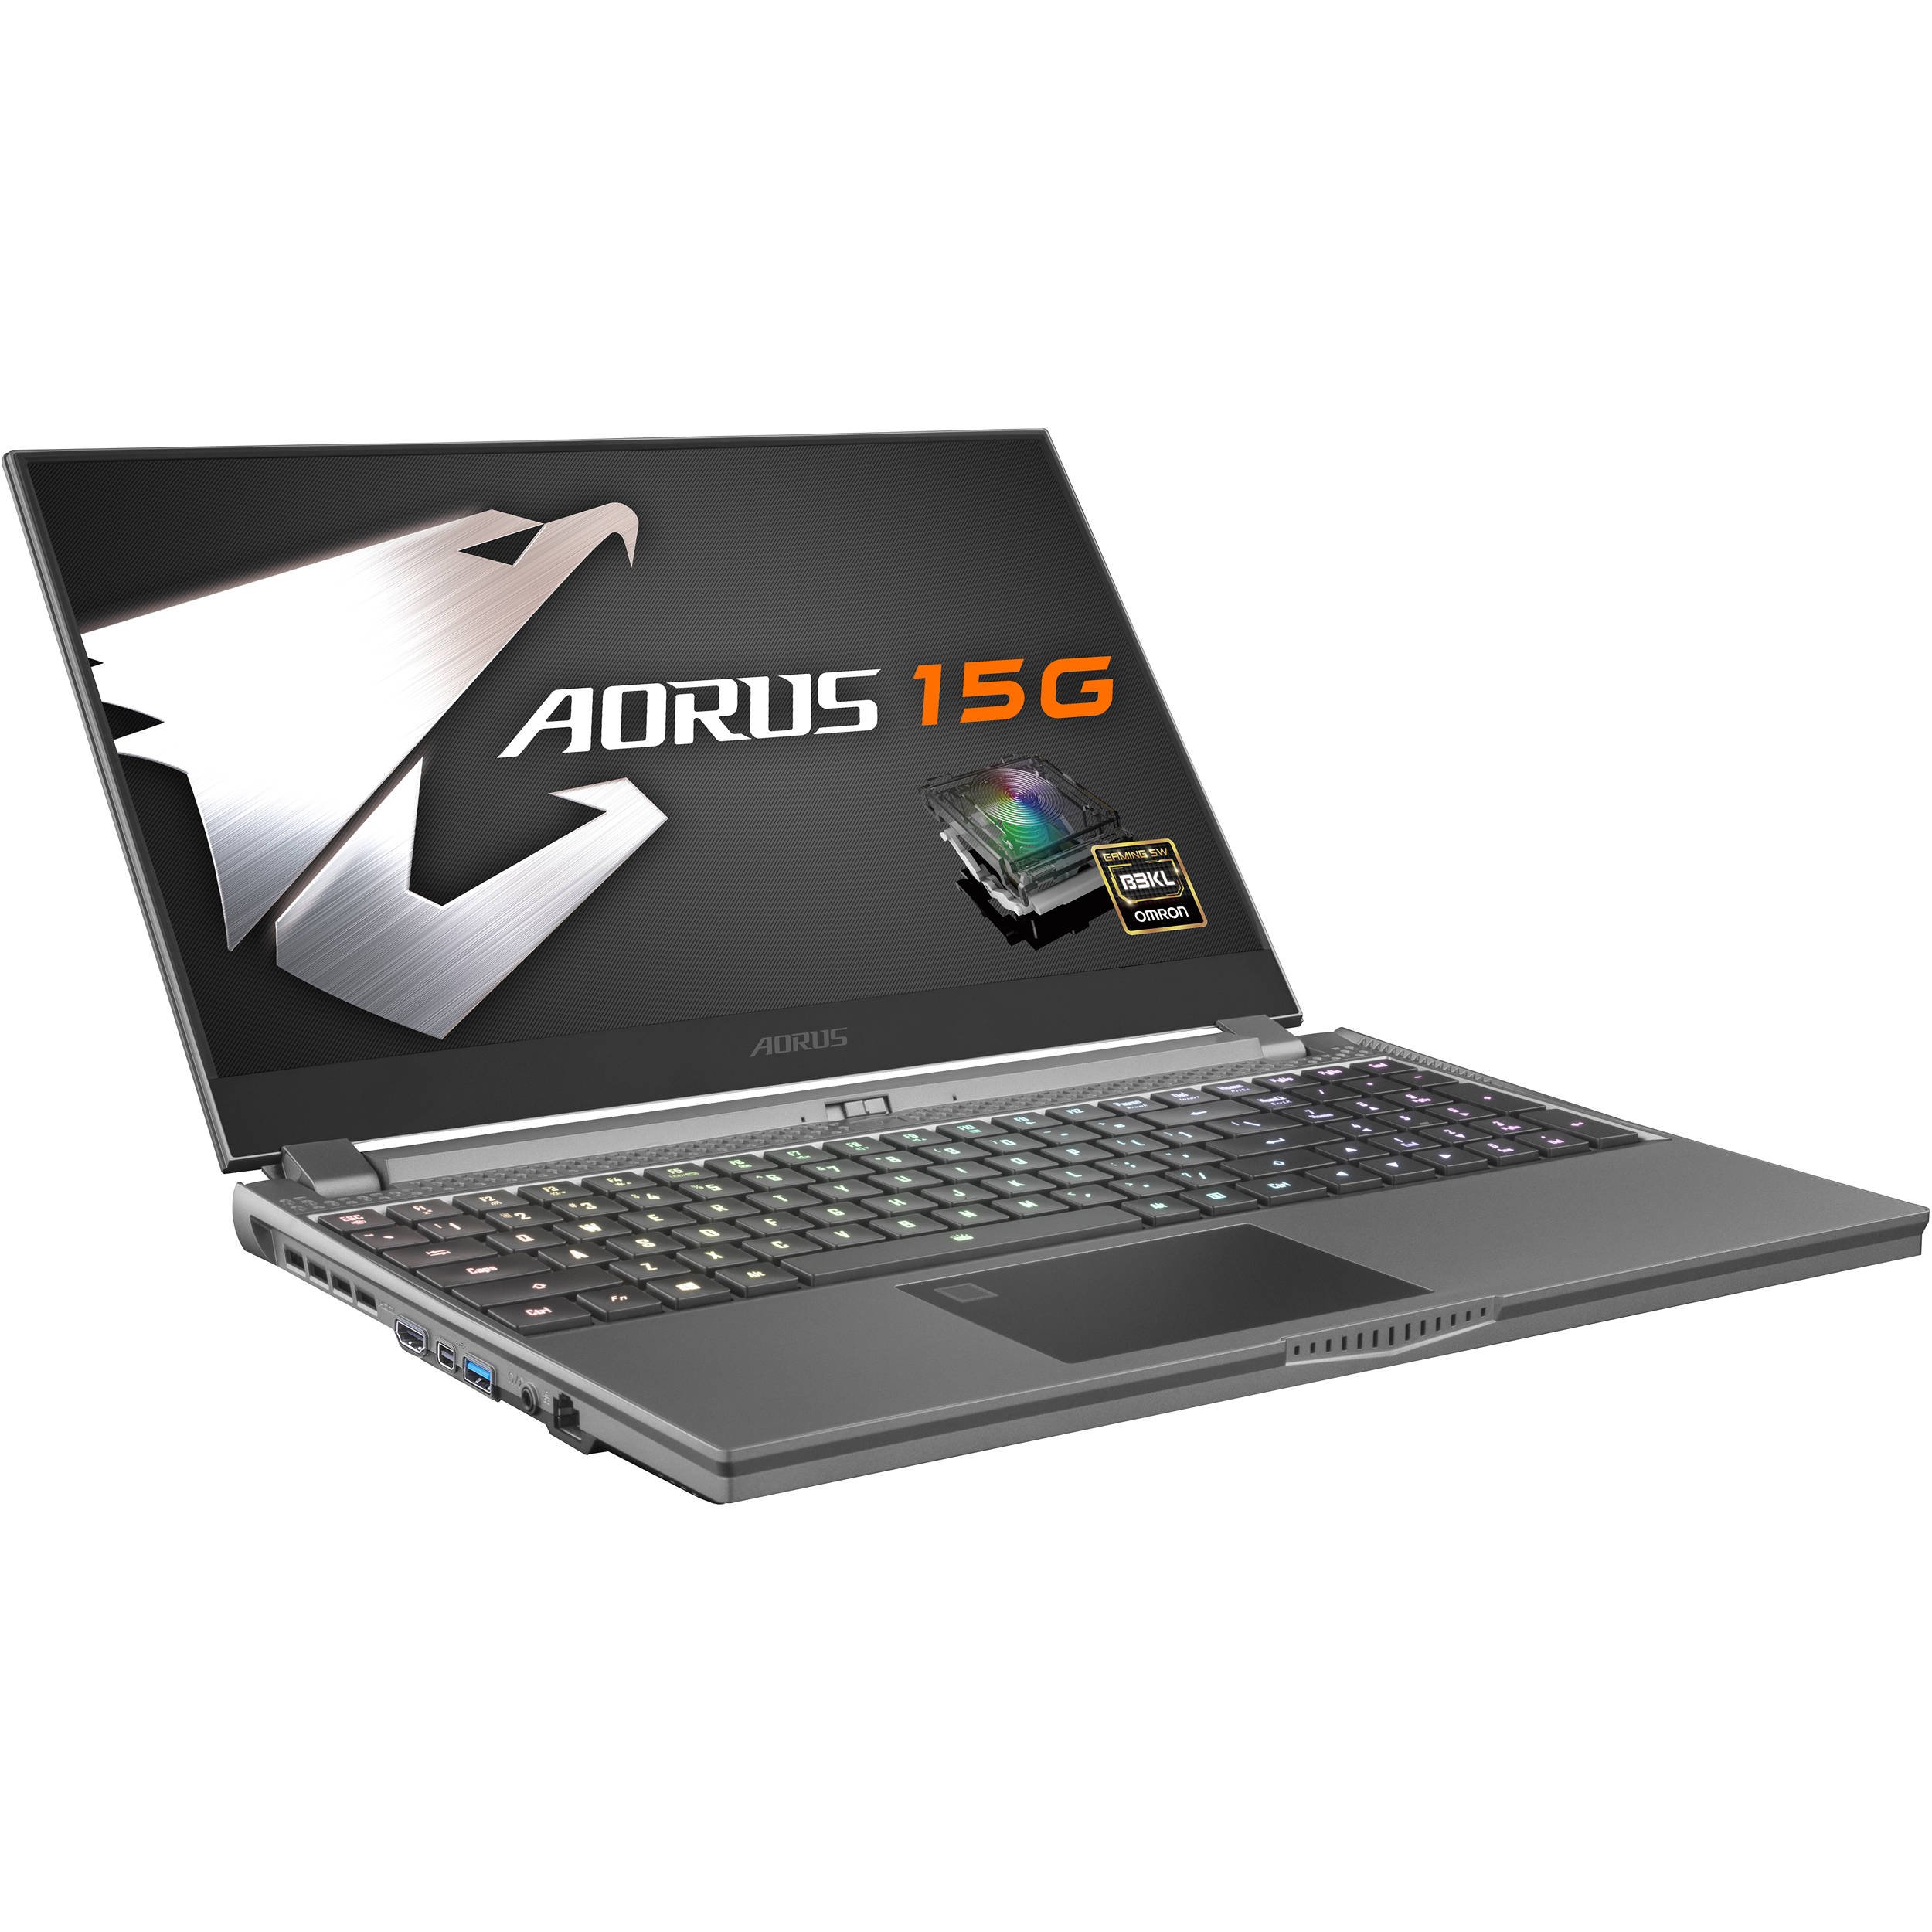 The Perfect Gaming Laptop? The AORUS 15G With Intel 10th-Gen and NVIDIA Geforce RTX 20 Series GPU